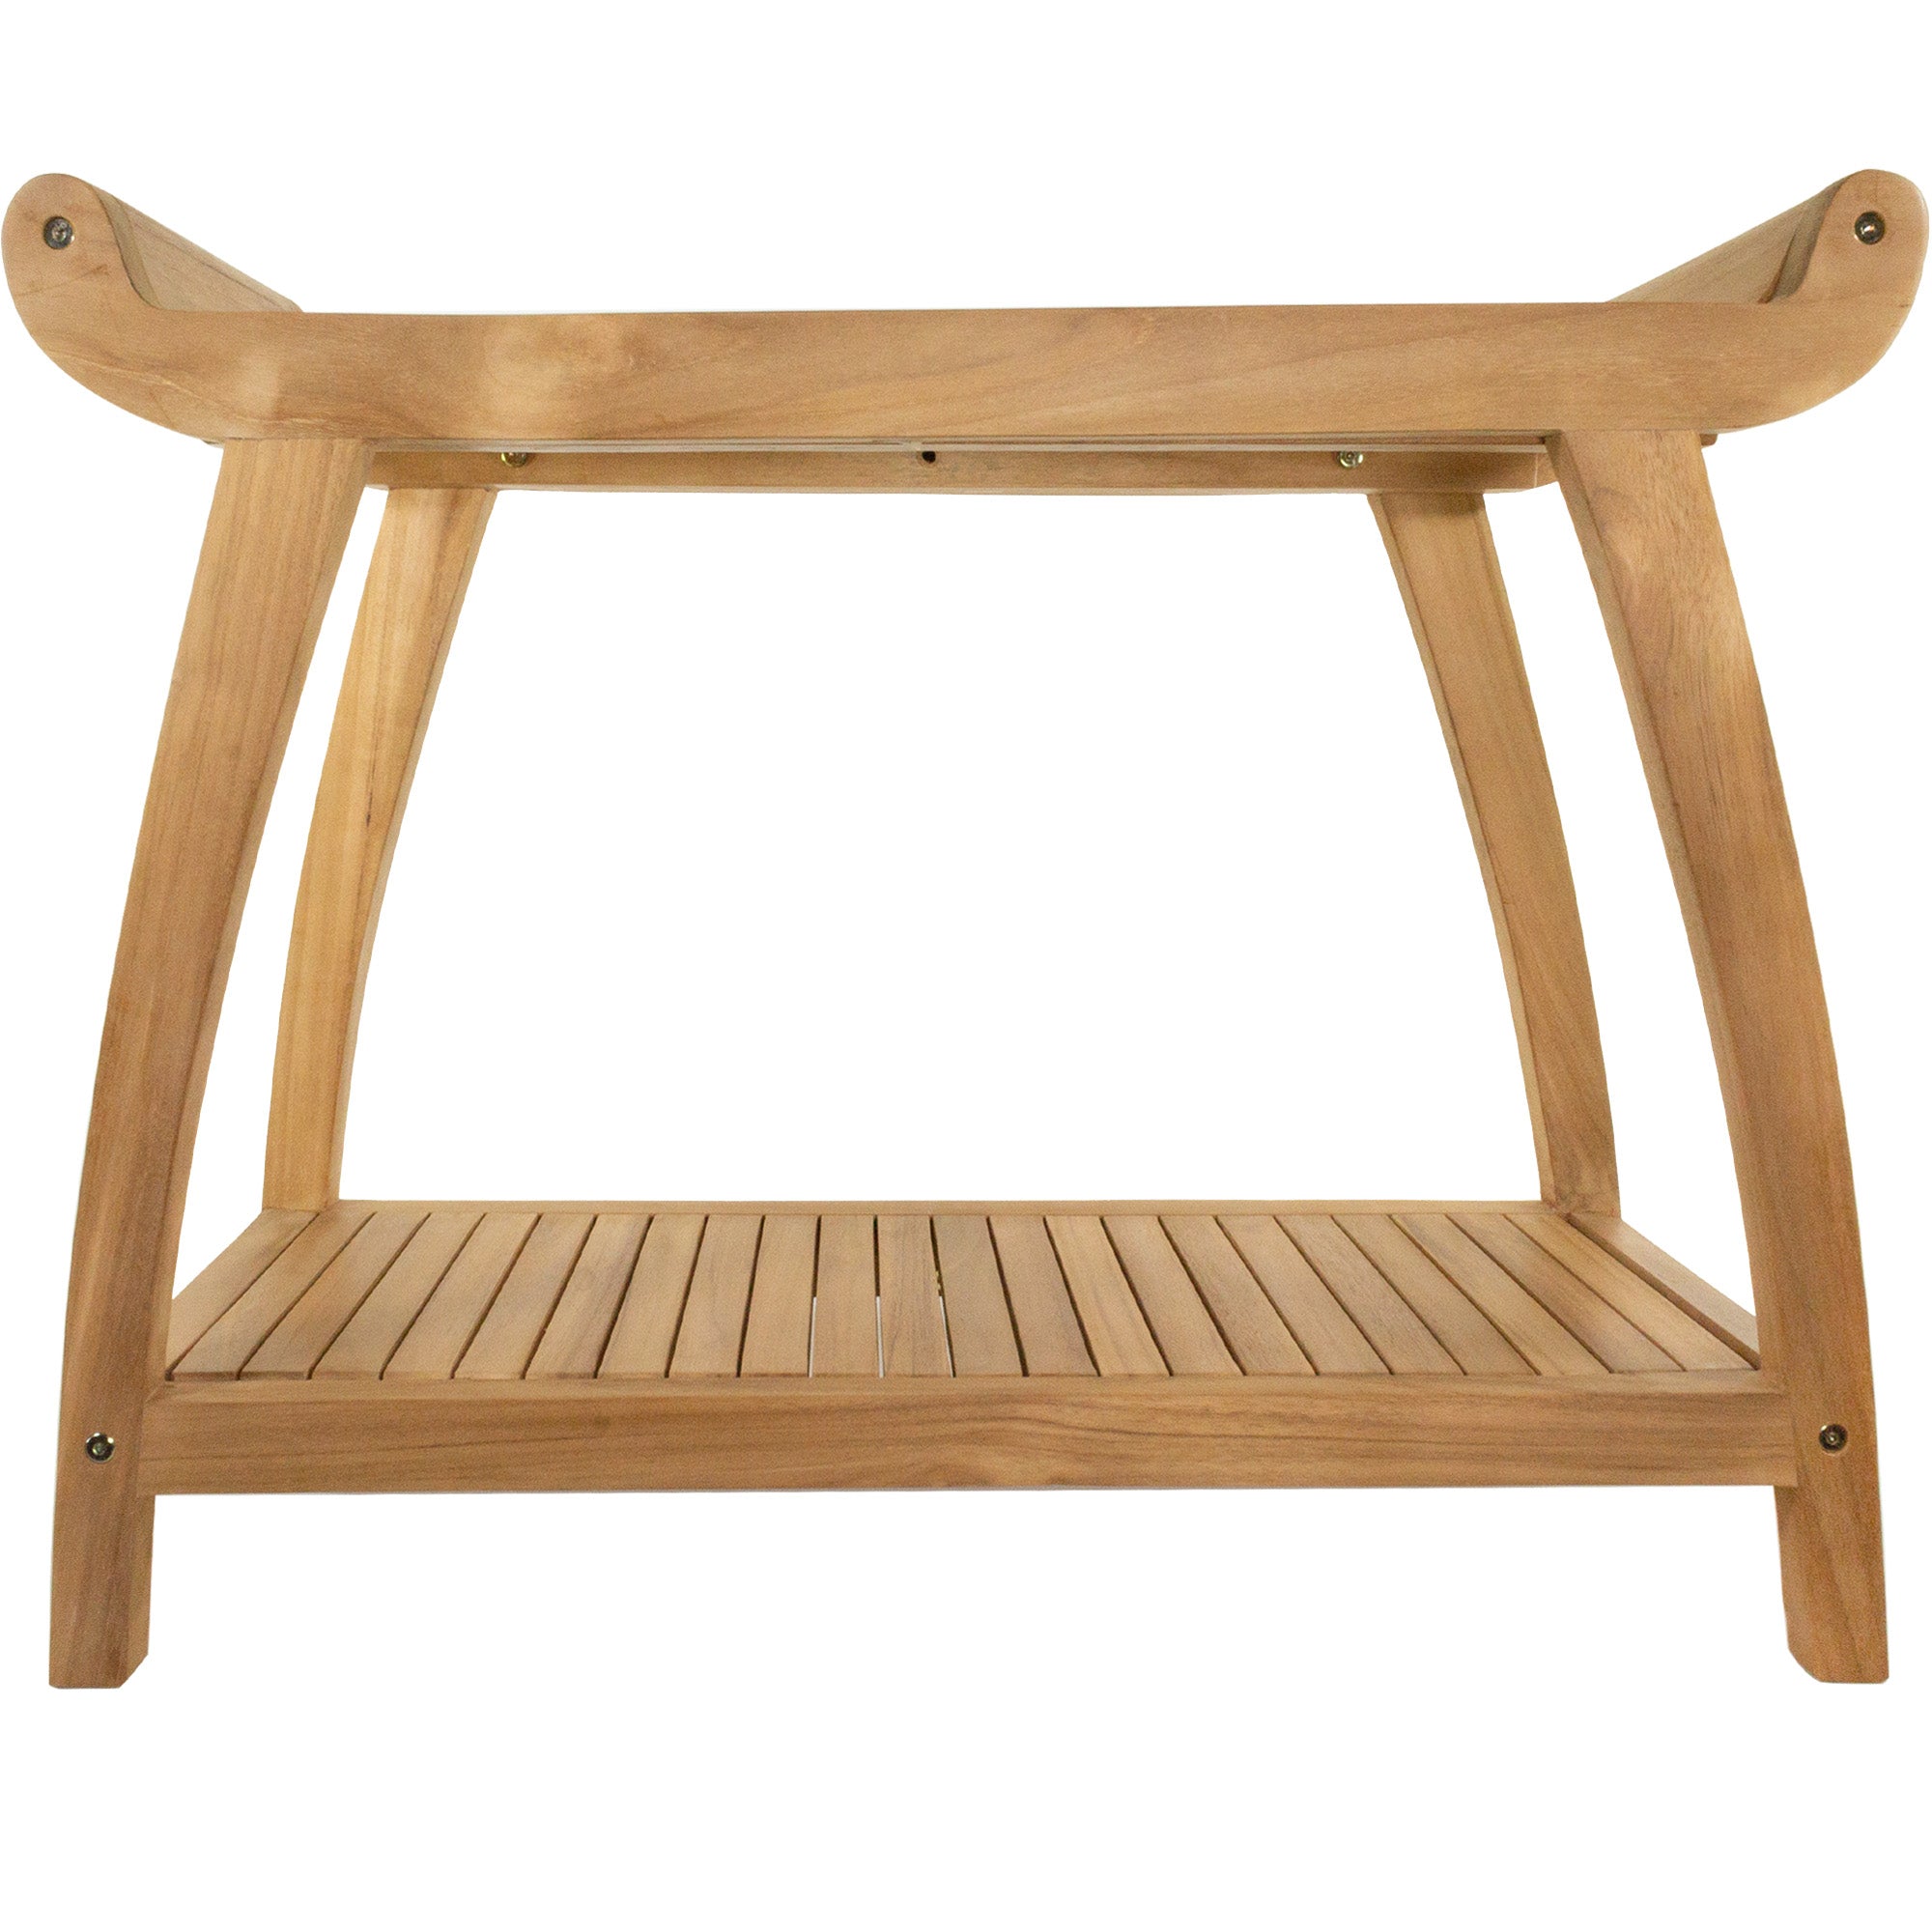 Norwegian Natural Teak Shower and Bath Curved Spa Bench with Shelf - 30"